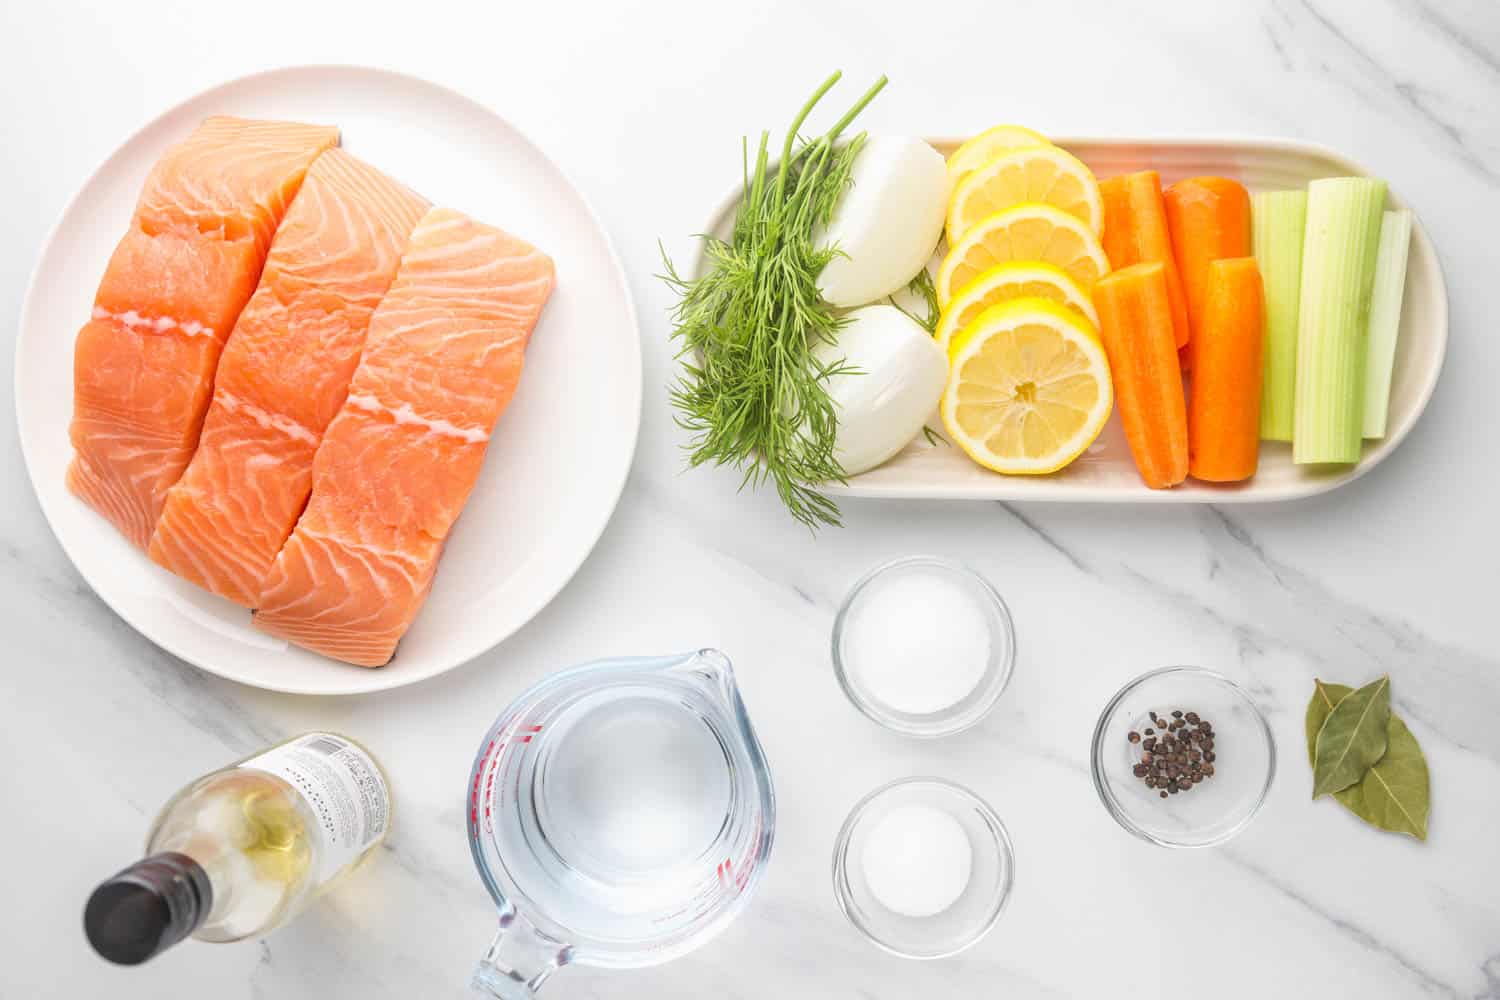 Ingredients needed to poach salmon including salmon fillets, lemon, onion, celery, carrot, dill, bay leaf, white wine, water, salt, sugar, peppercorns.